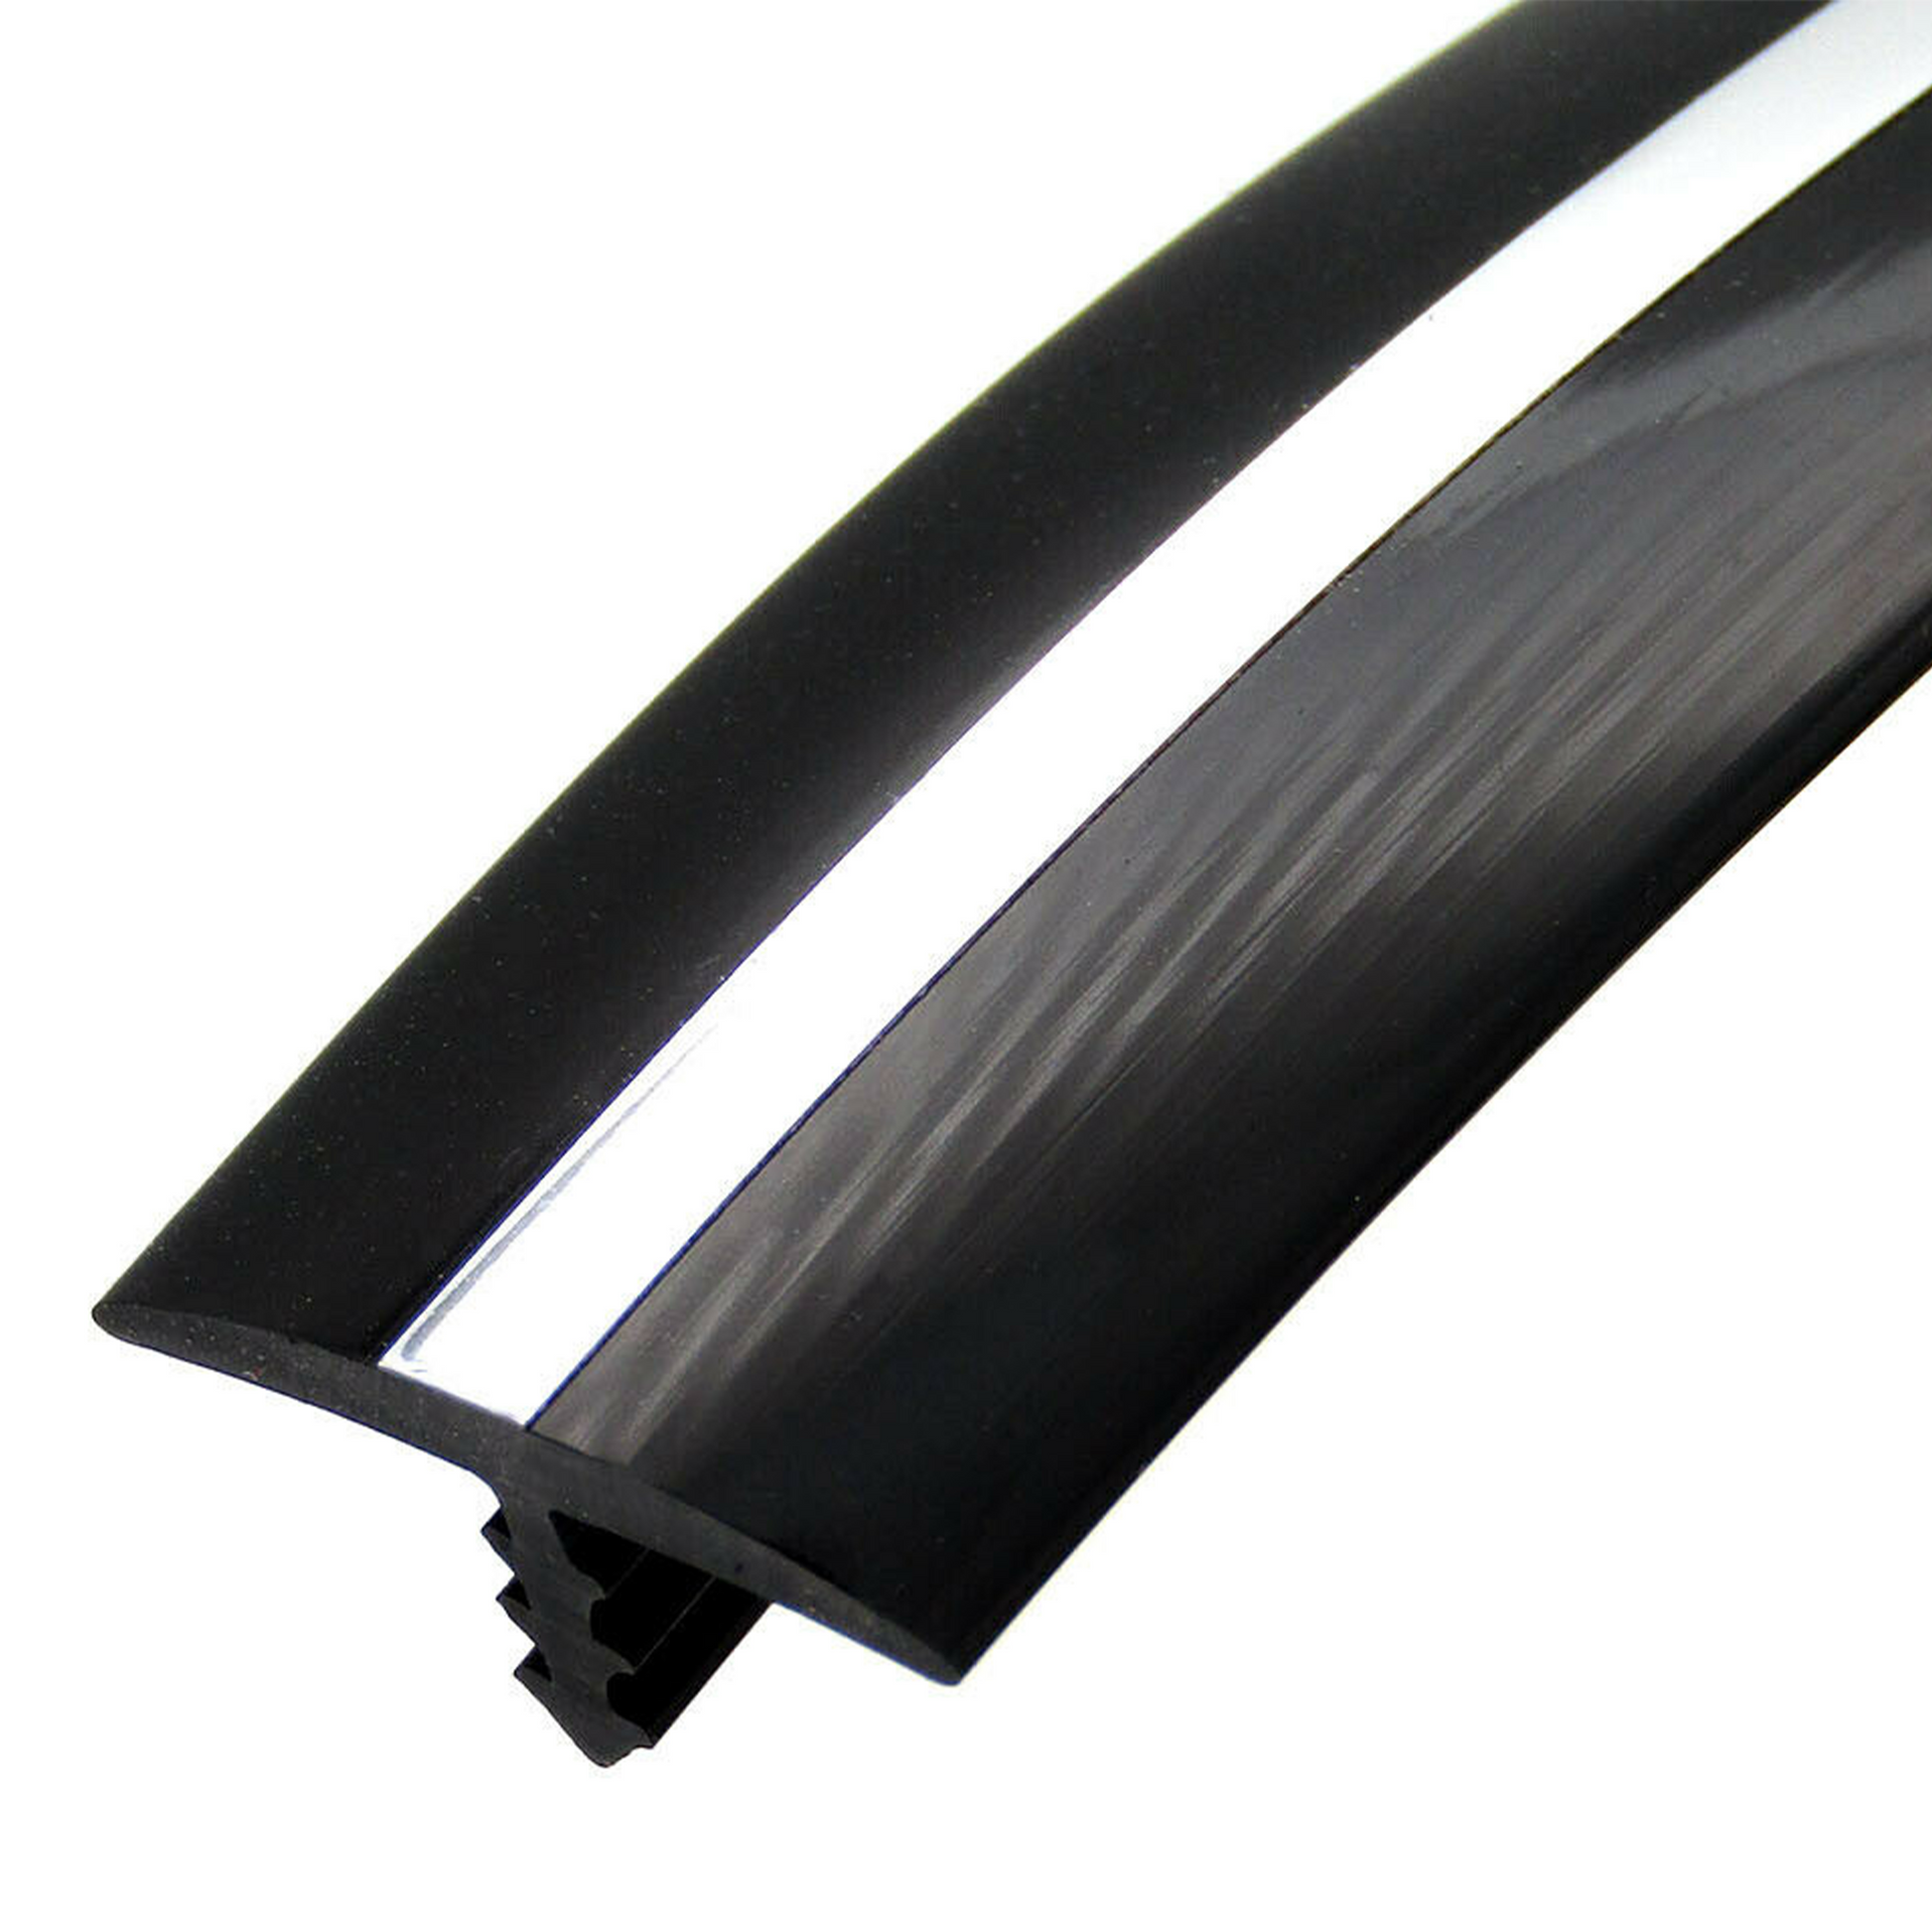 This black, 1’L x ¾”W, T-Molding features a metallic center strip and comes as one piece based on quantity ordered.  1’L x 3/4"W